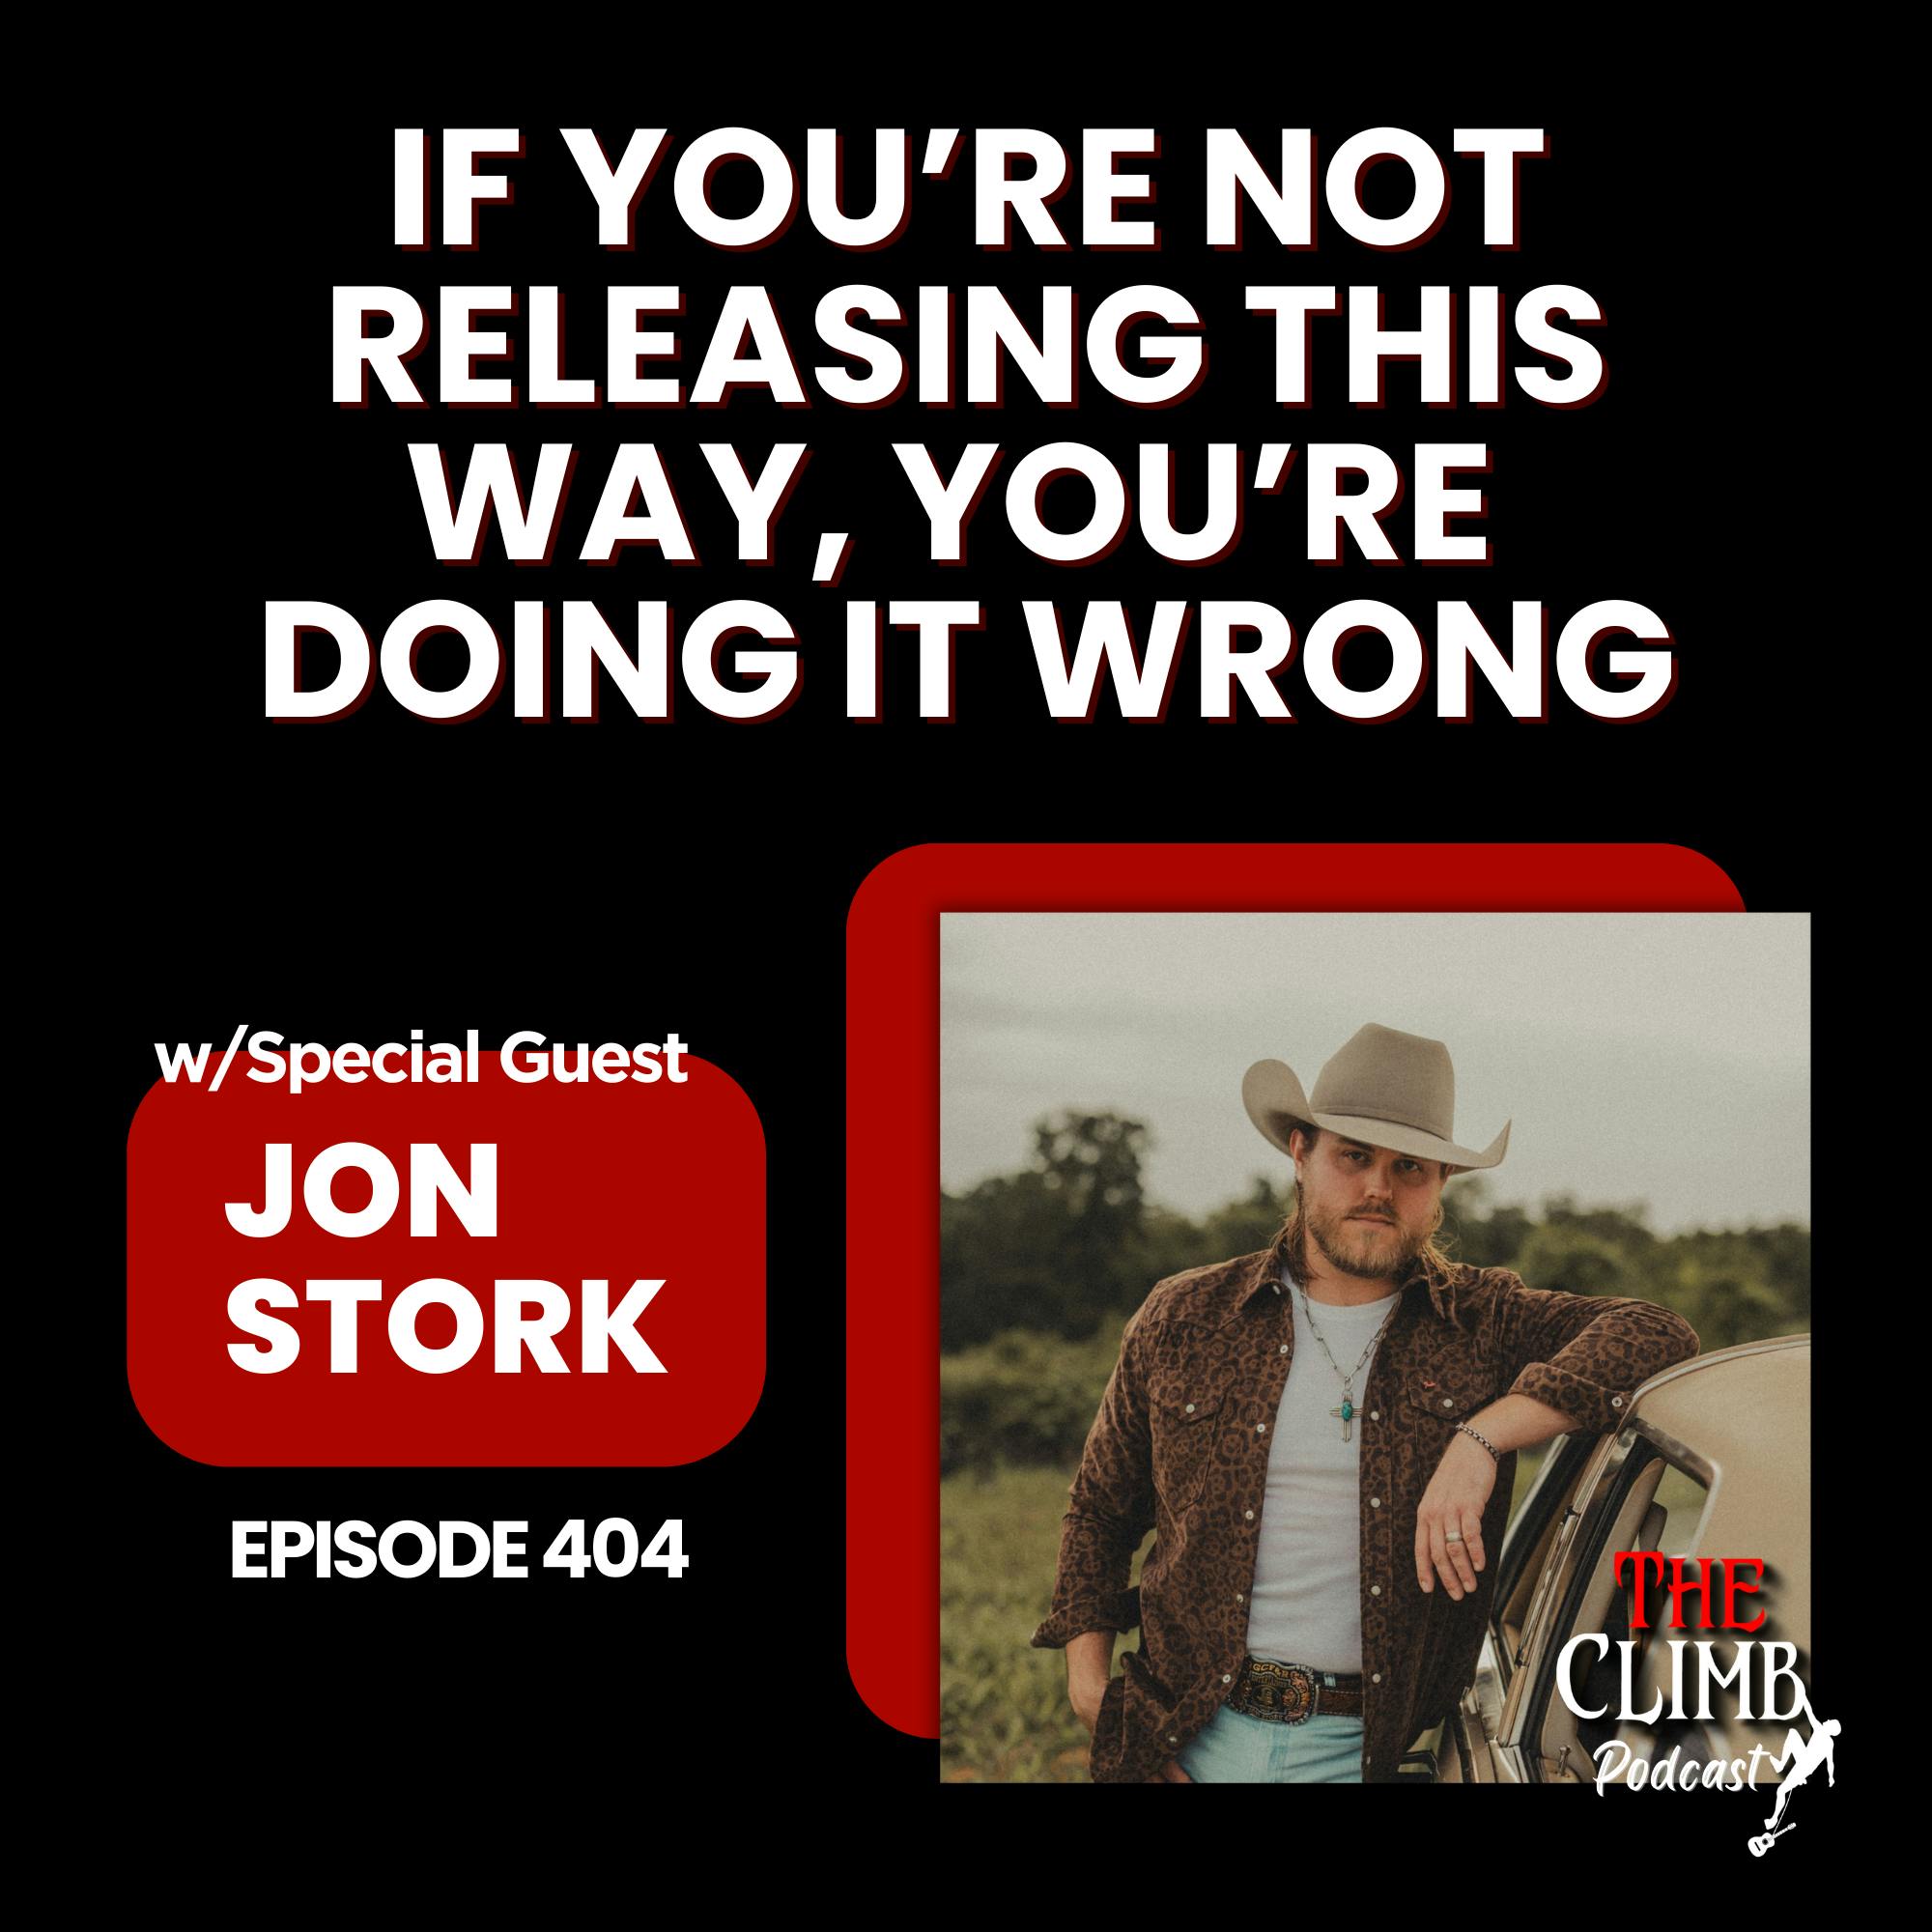 Ep 404: If You’re Not Releasing This Way, You’re Doing It Wrong! w/ Jon Stork